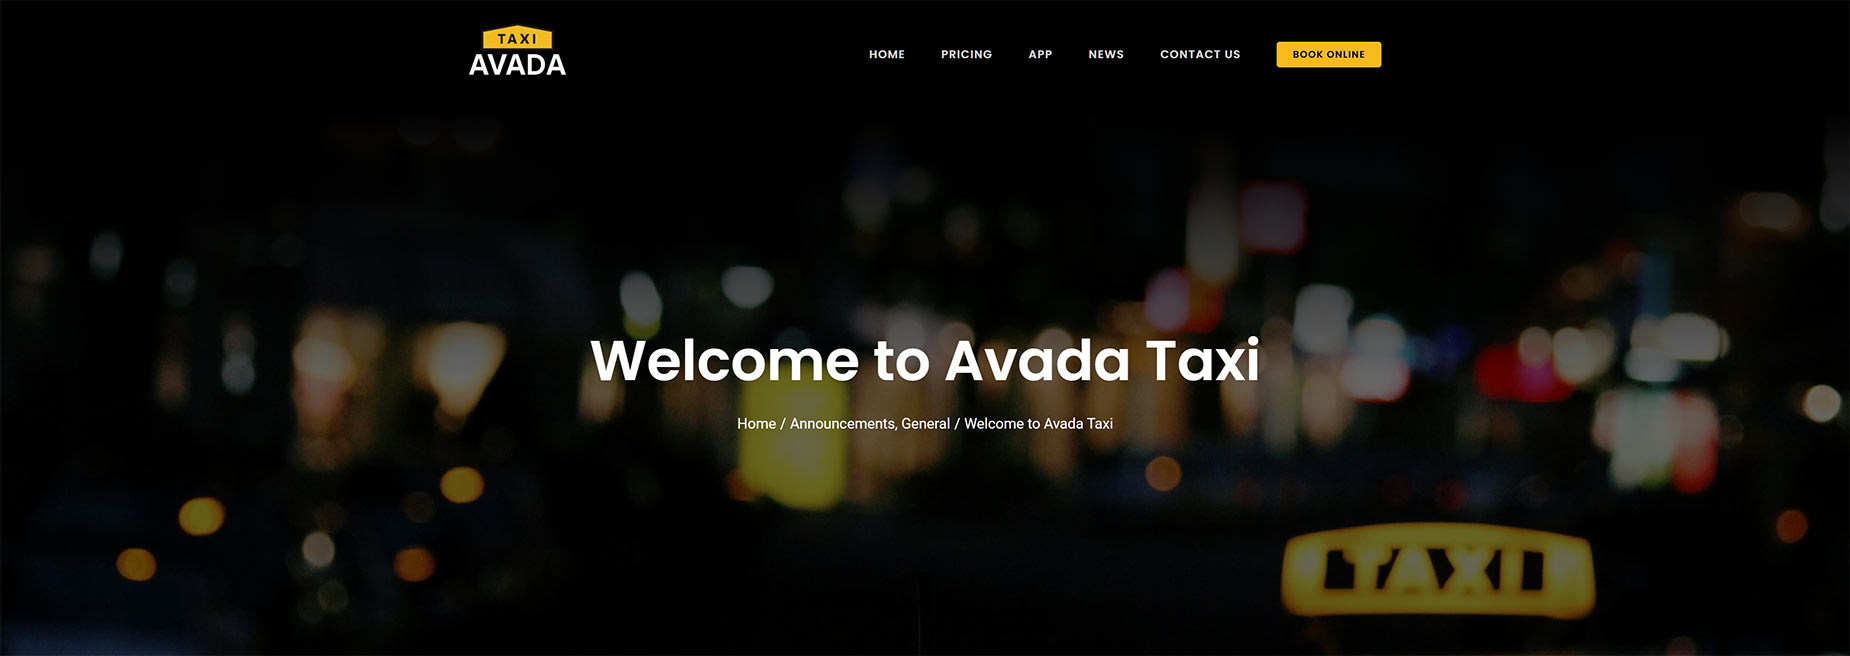 Taxi Demo Front End Custom Page Title Bar Layout Section